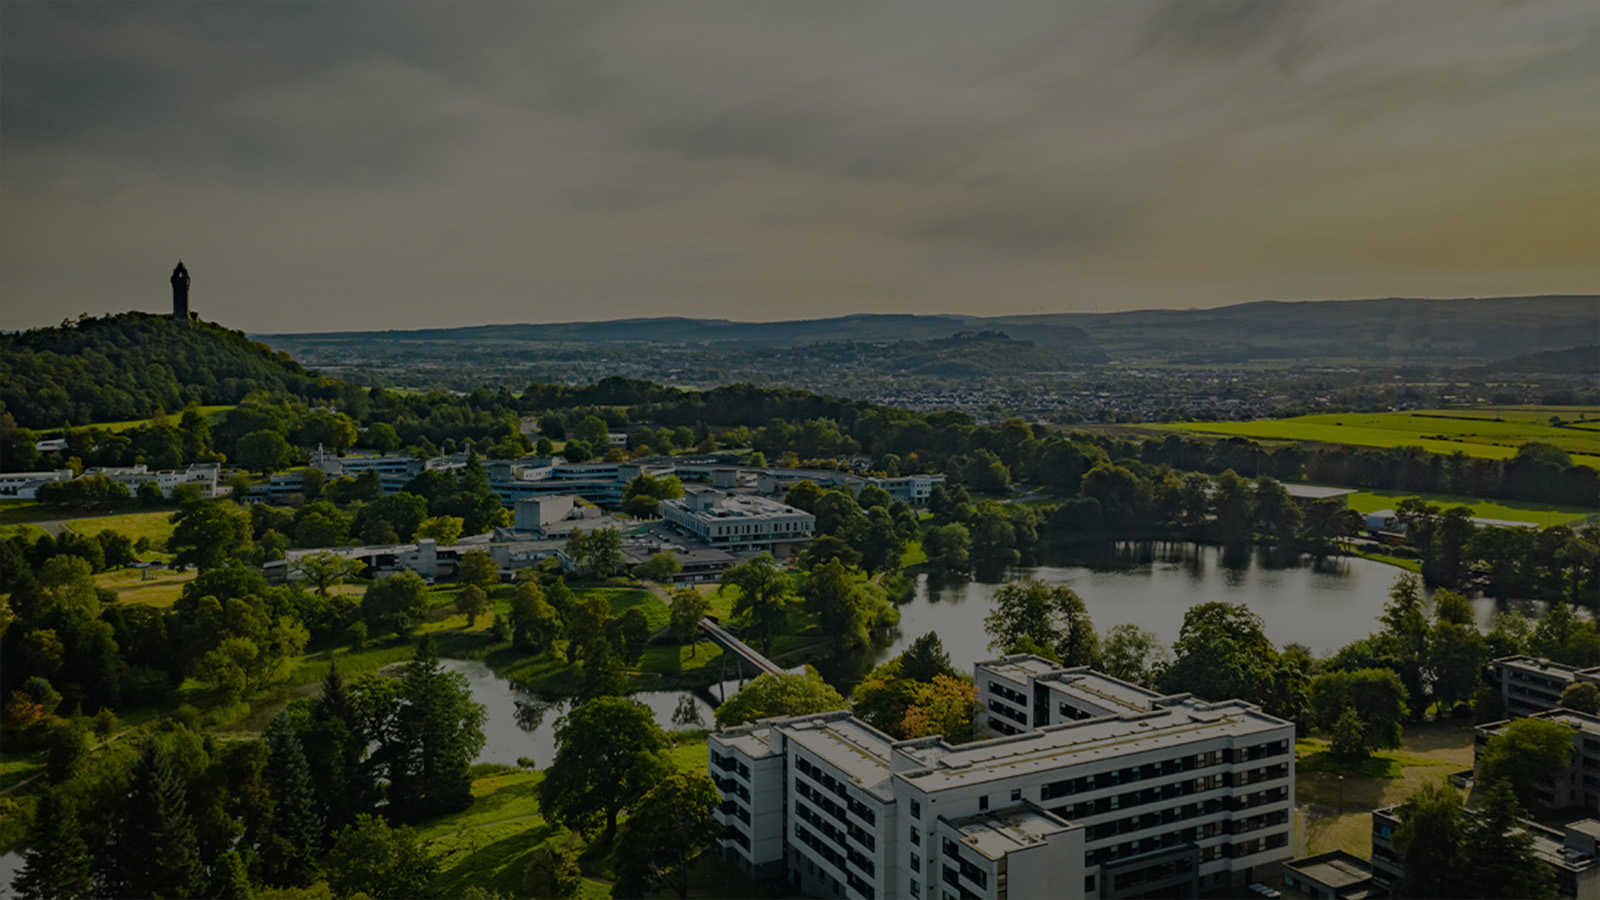 A landscape shot of Stirling which is a very green town with a loch in the centre and a hill nearby where the monument stands - the University is prominent in the forefront of the image, a collection of buildings of varying ages